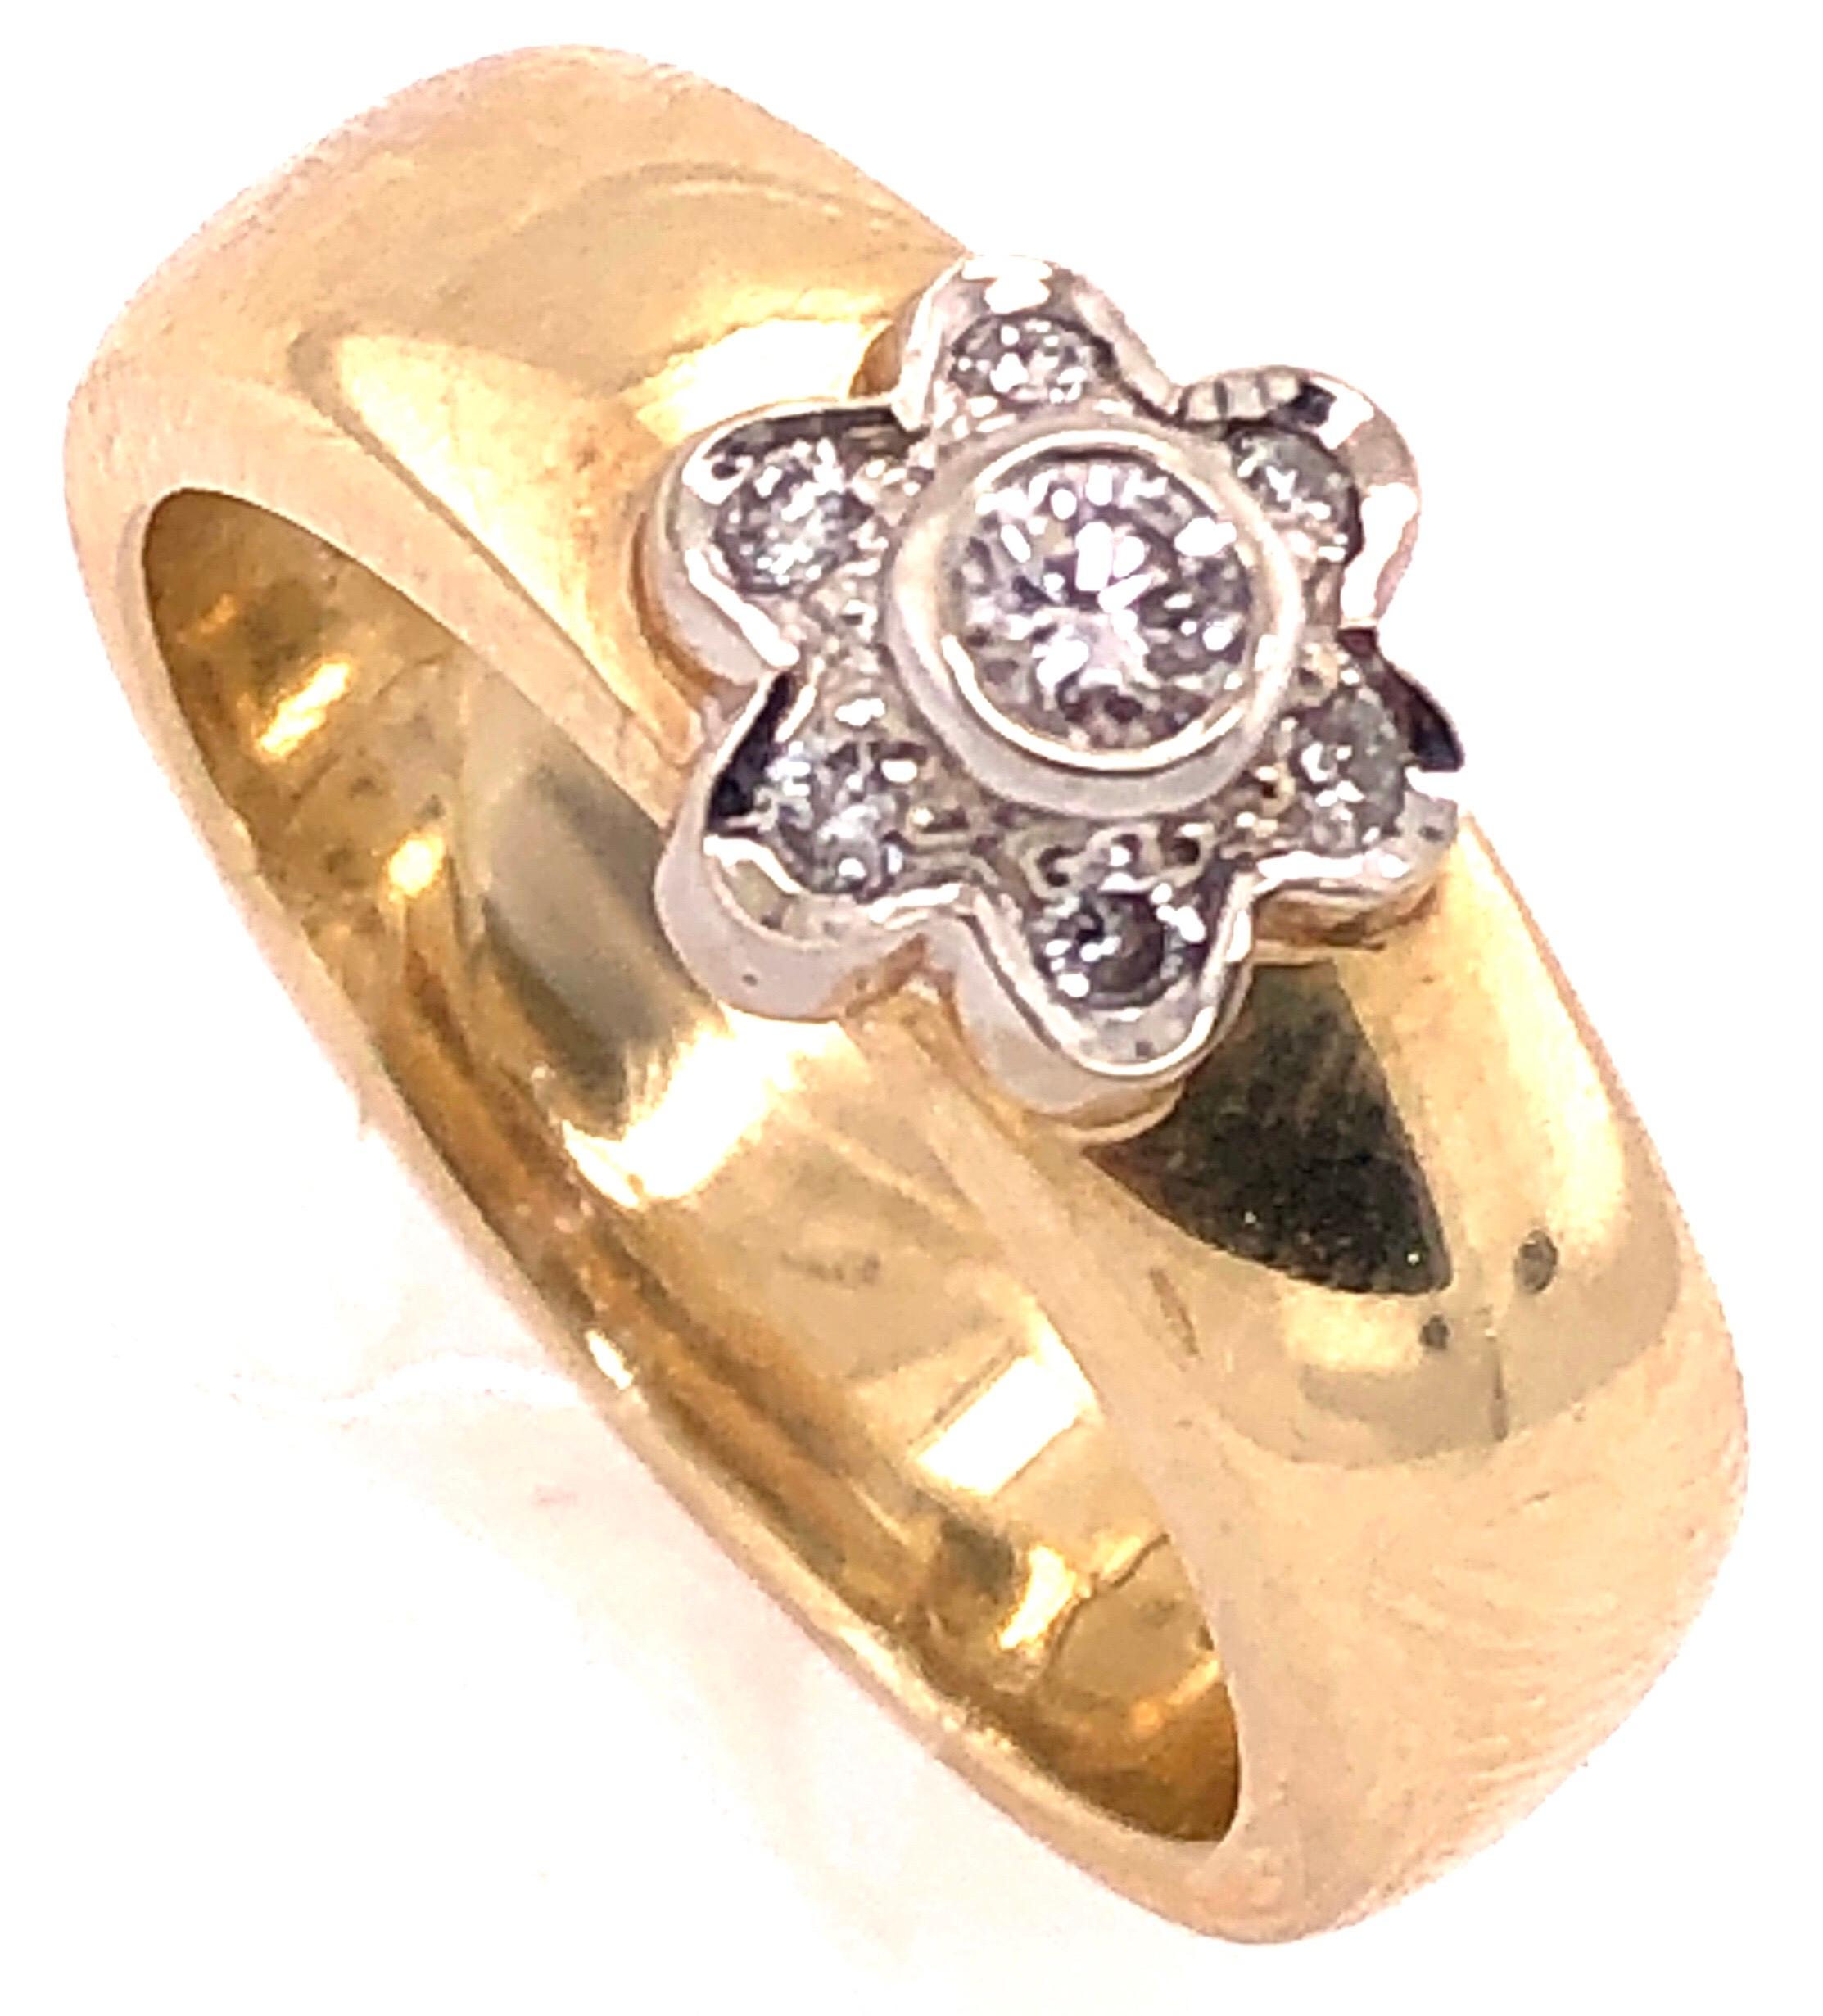 14 Karat Two Tone Yellow And White Gold With Diamond Flower Ring /Band
0.50 Total Diamond Weight.
Size 6 
8.60 grams total weight.